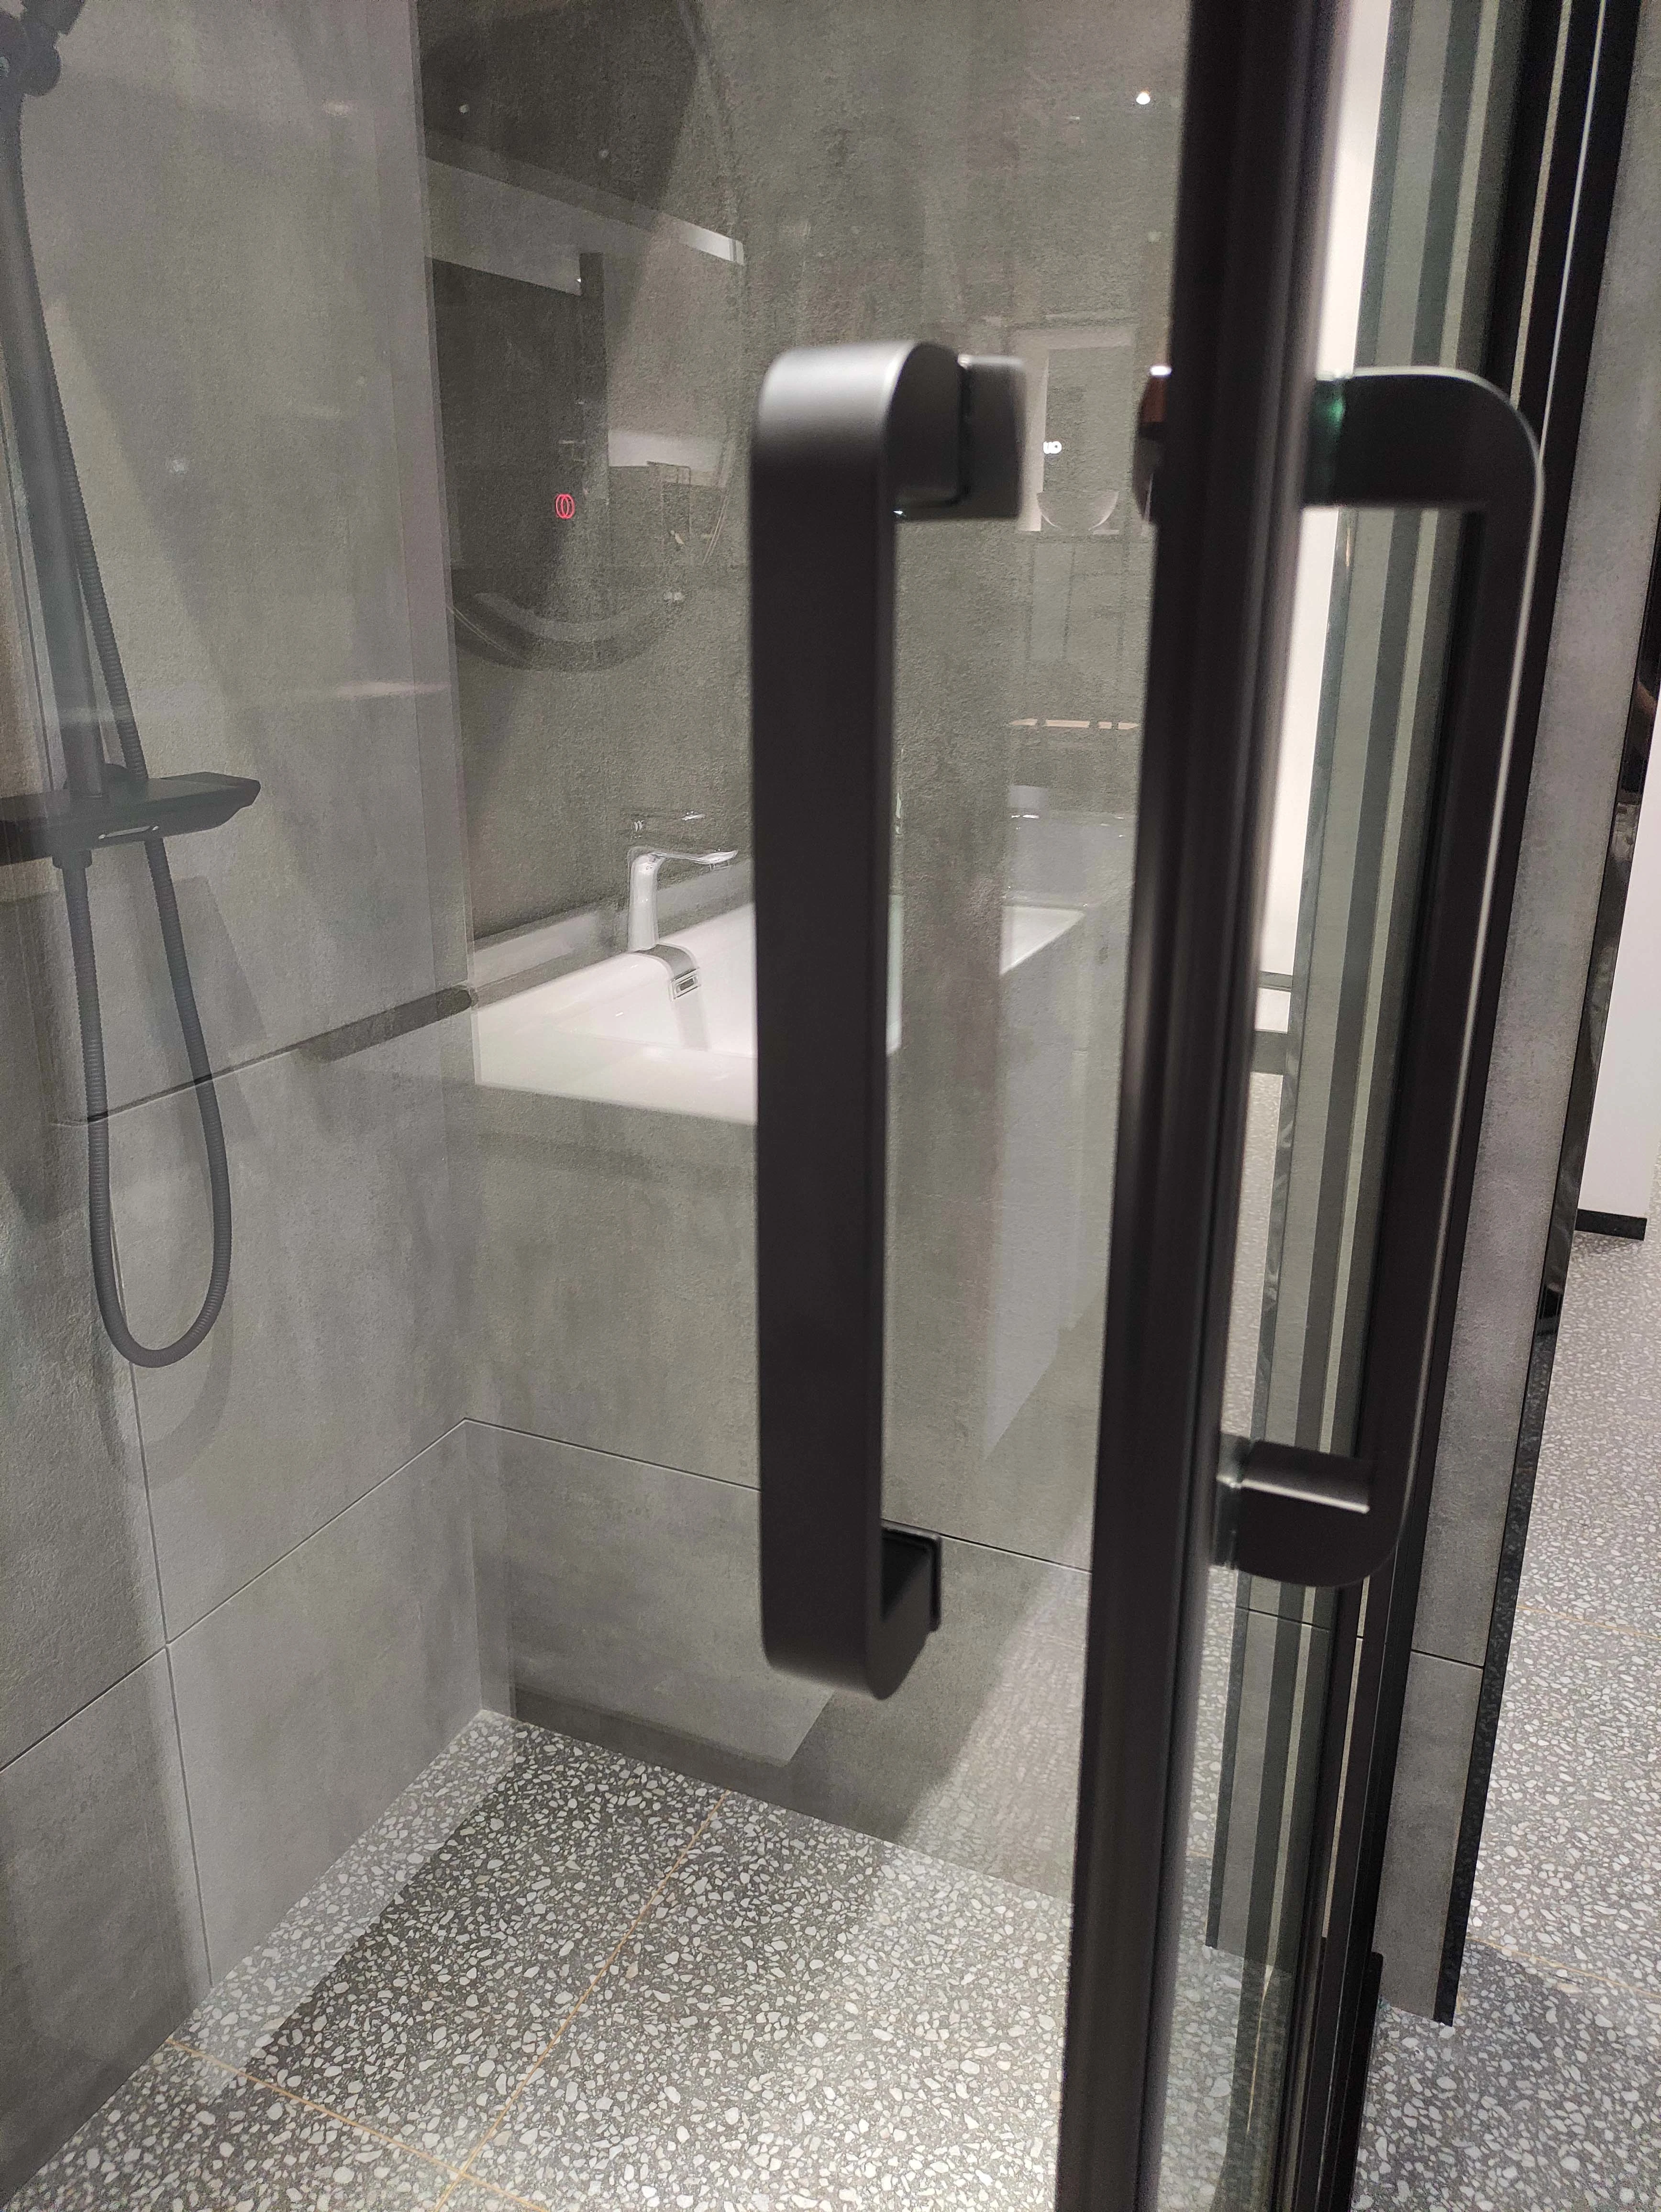 Corner Quadrant Shower Cabinet Bathroom Sliding Tempered Glass Room with durable accessories